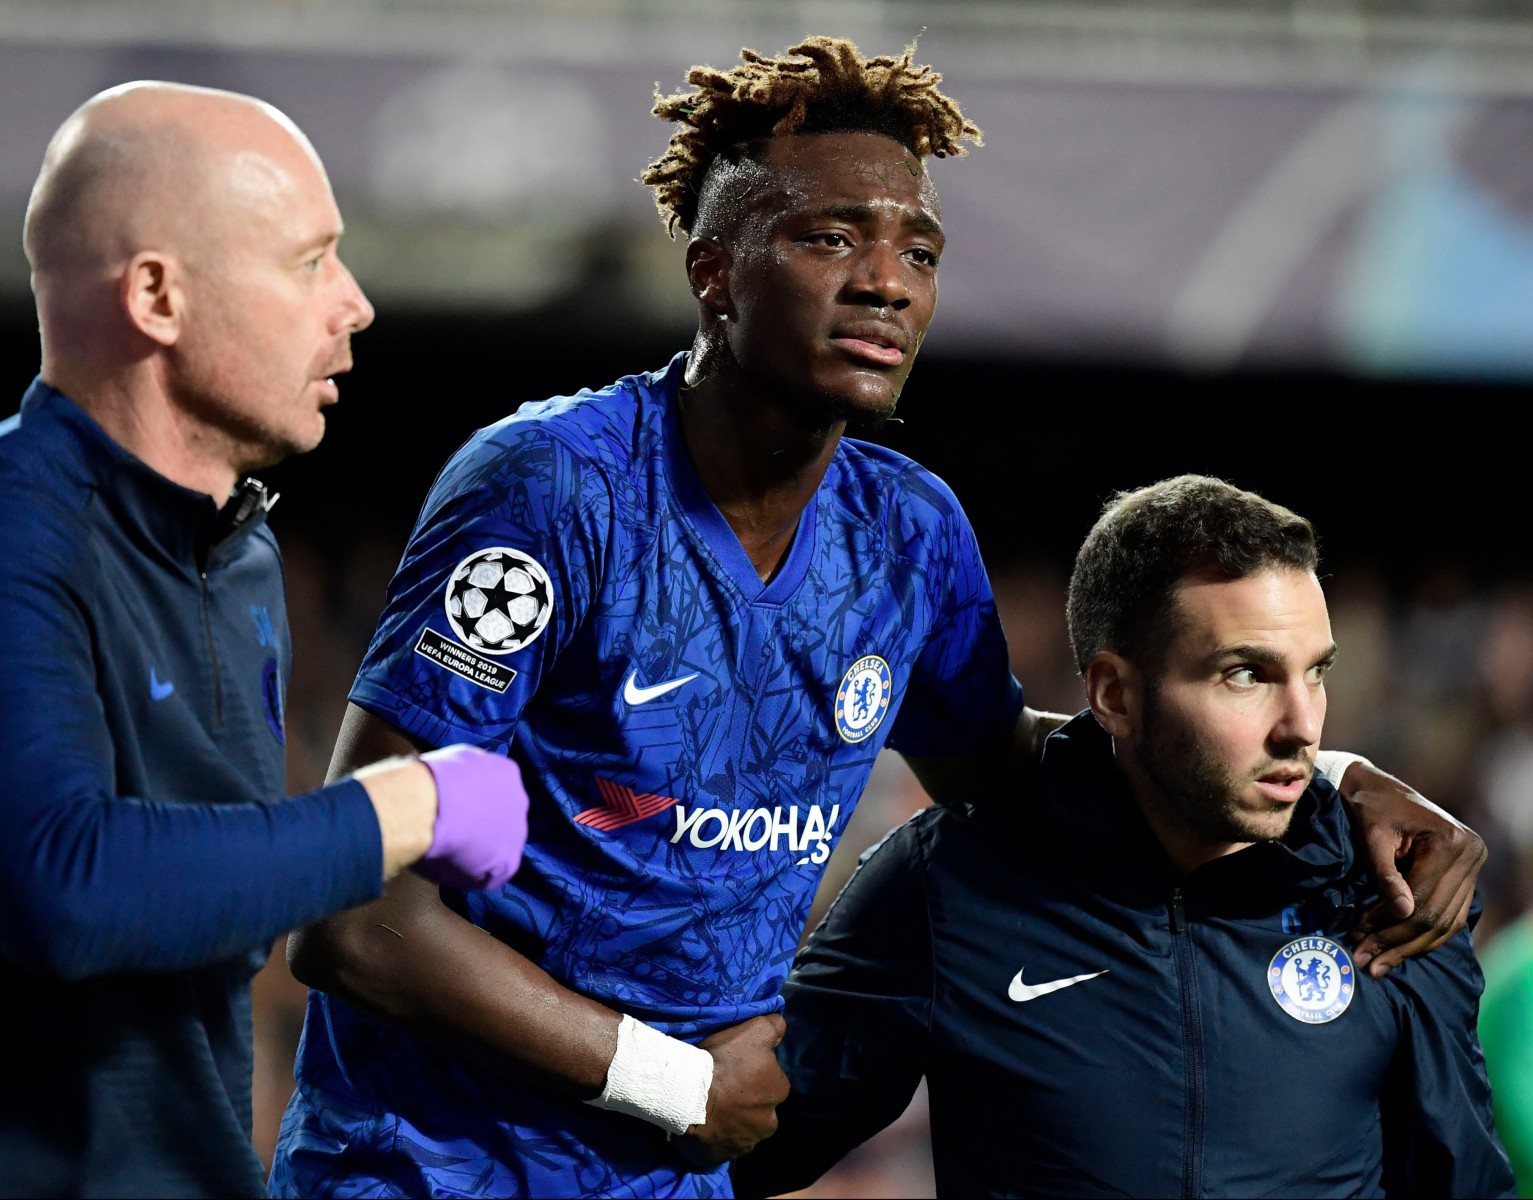 , Injured Tammy Abraham watched second half of Valencia vs Chelsea on delayed stream on his phone in changing room